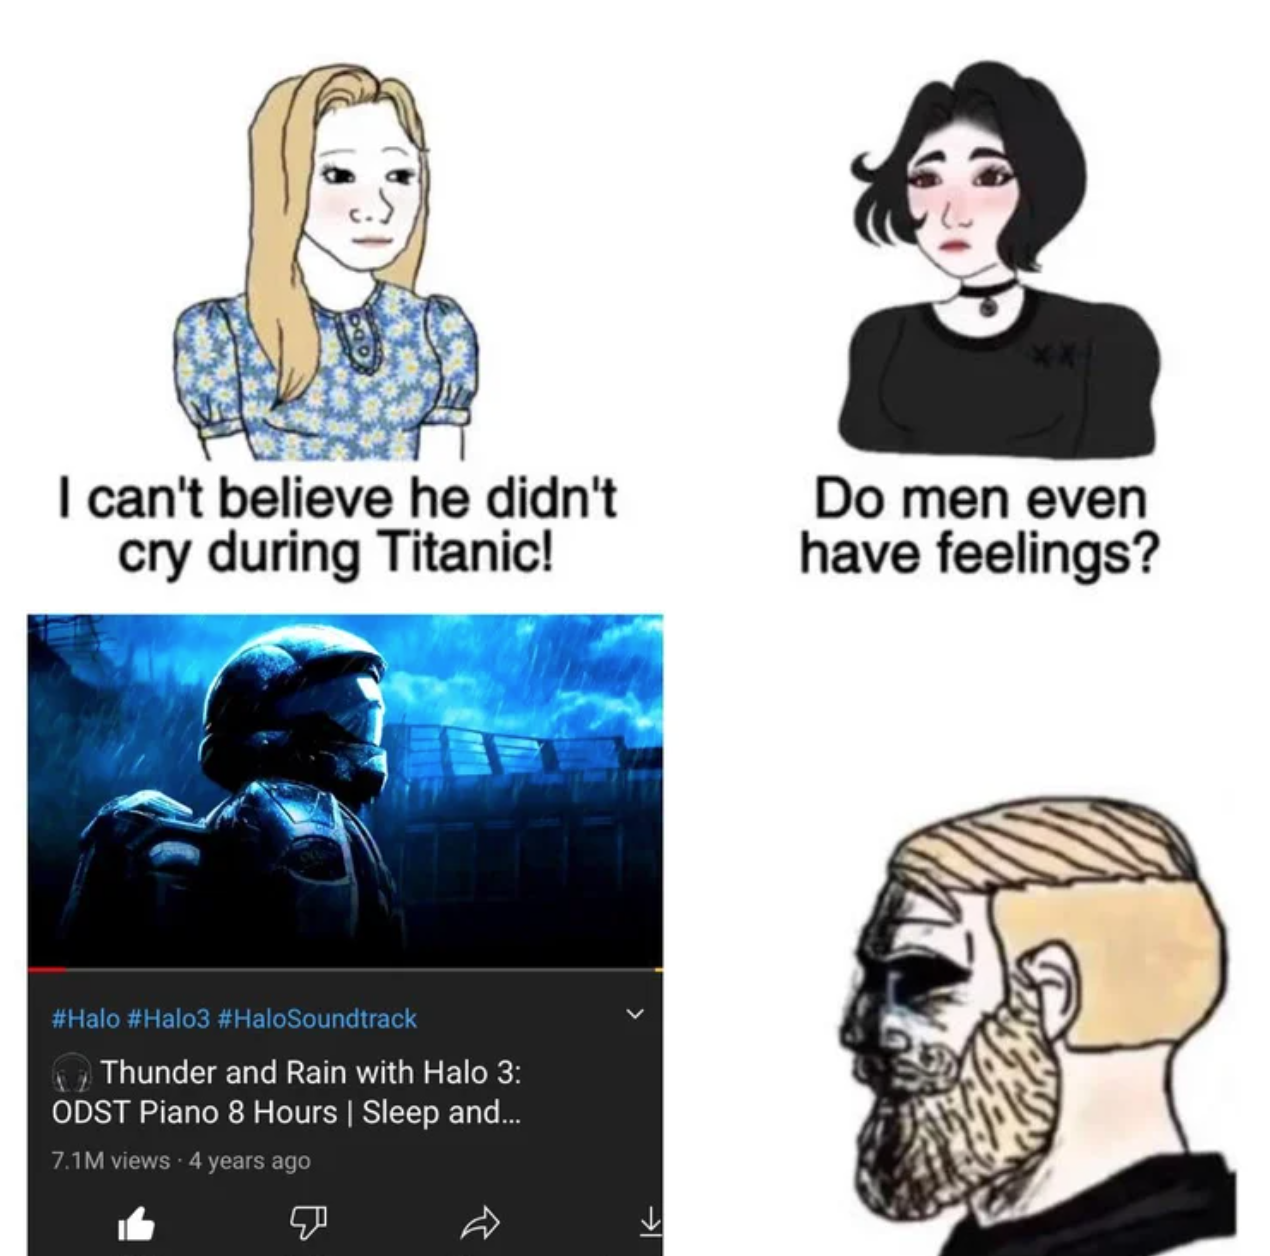 funny gaming memes  - can t believe he didn t cry - I can't believe he didn't cry during Titanic! Do men even have feelings? Halo HaloSoundtrack Thunder and Rain with Halo 3 Odst Piano 8 Hours Sleep and... 7.1M views 4 years ago